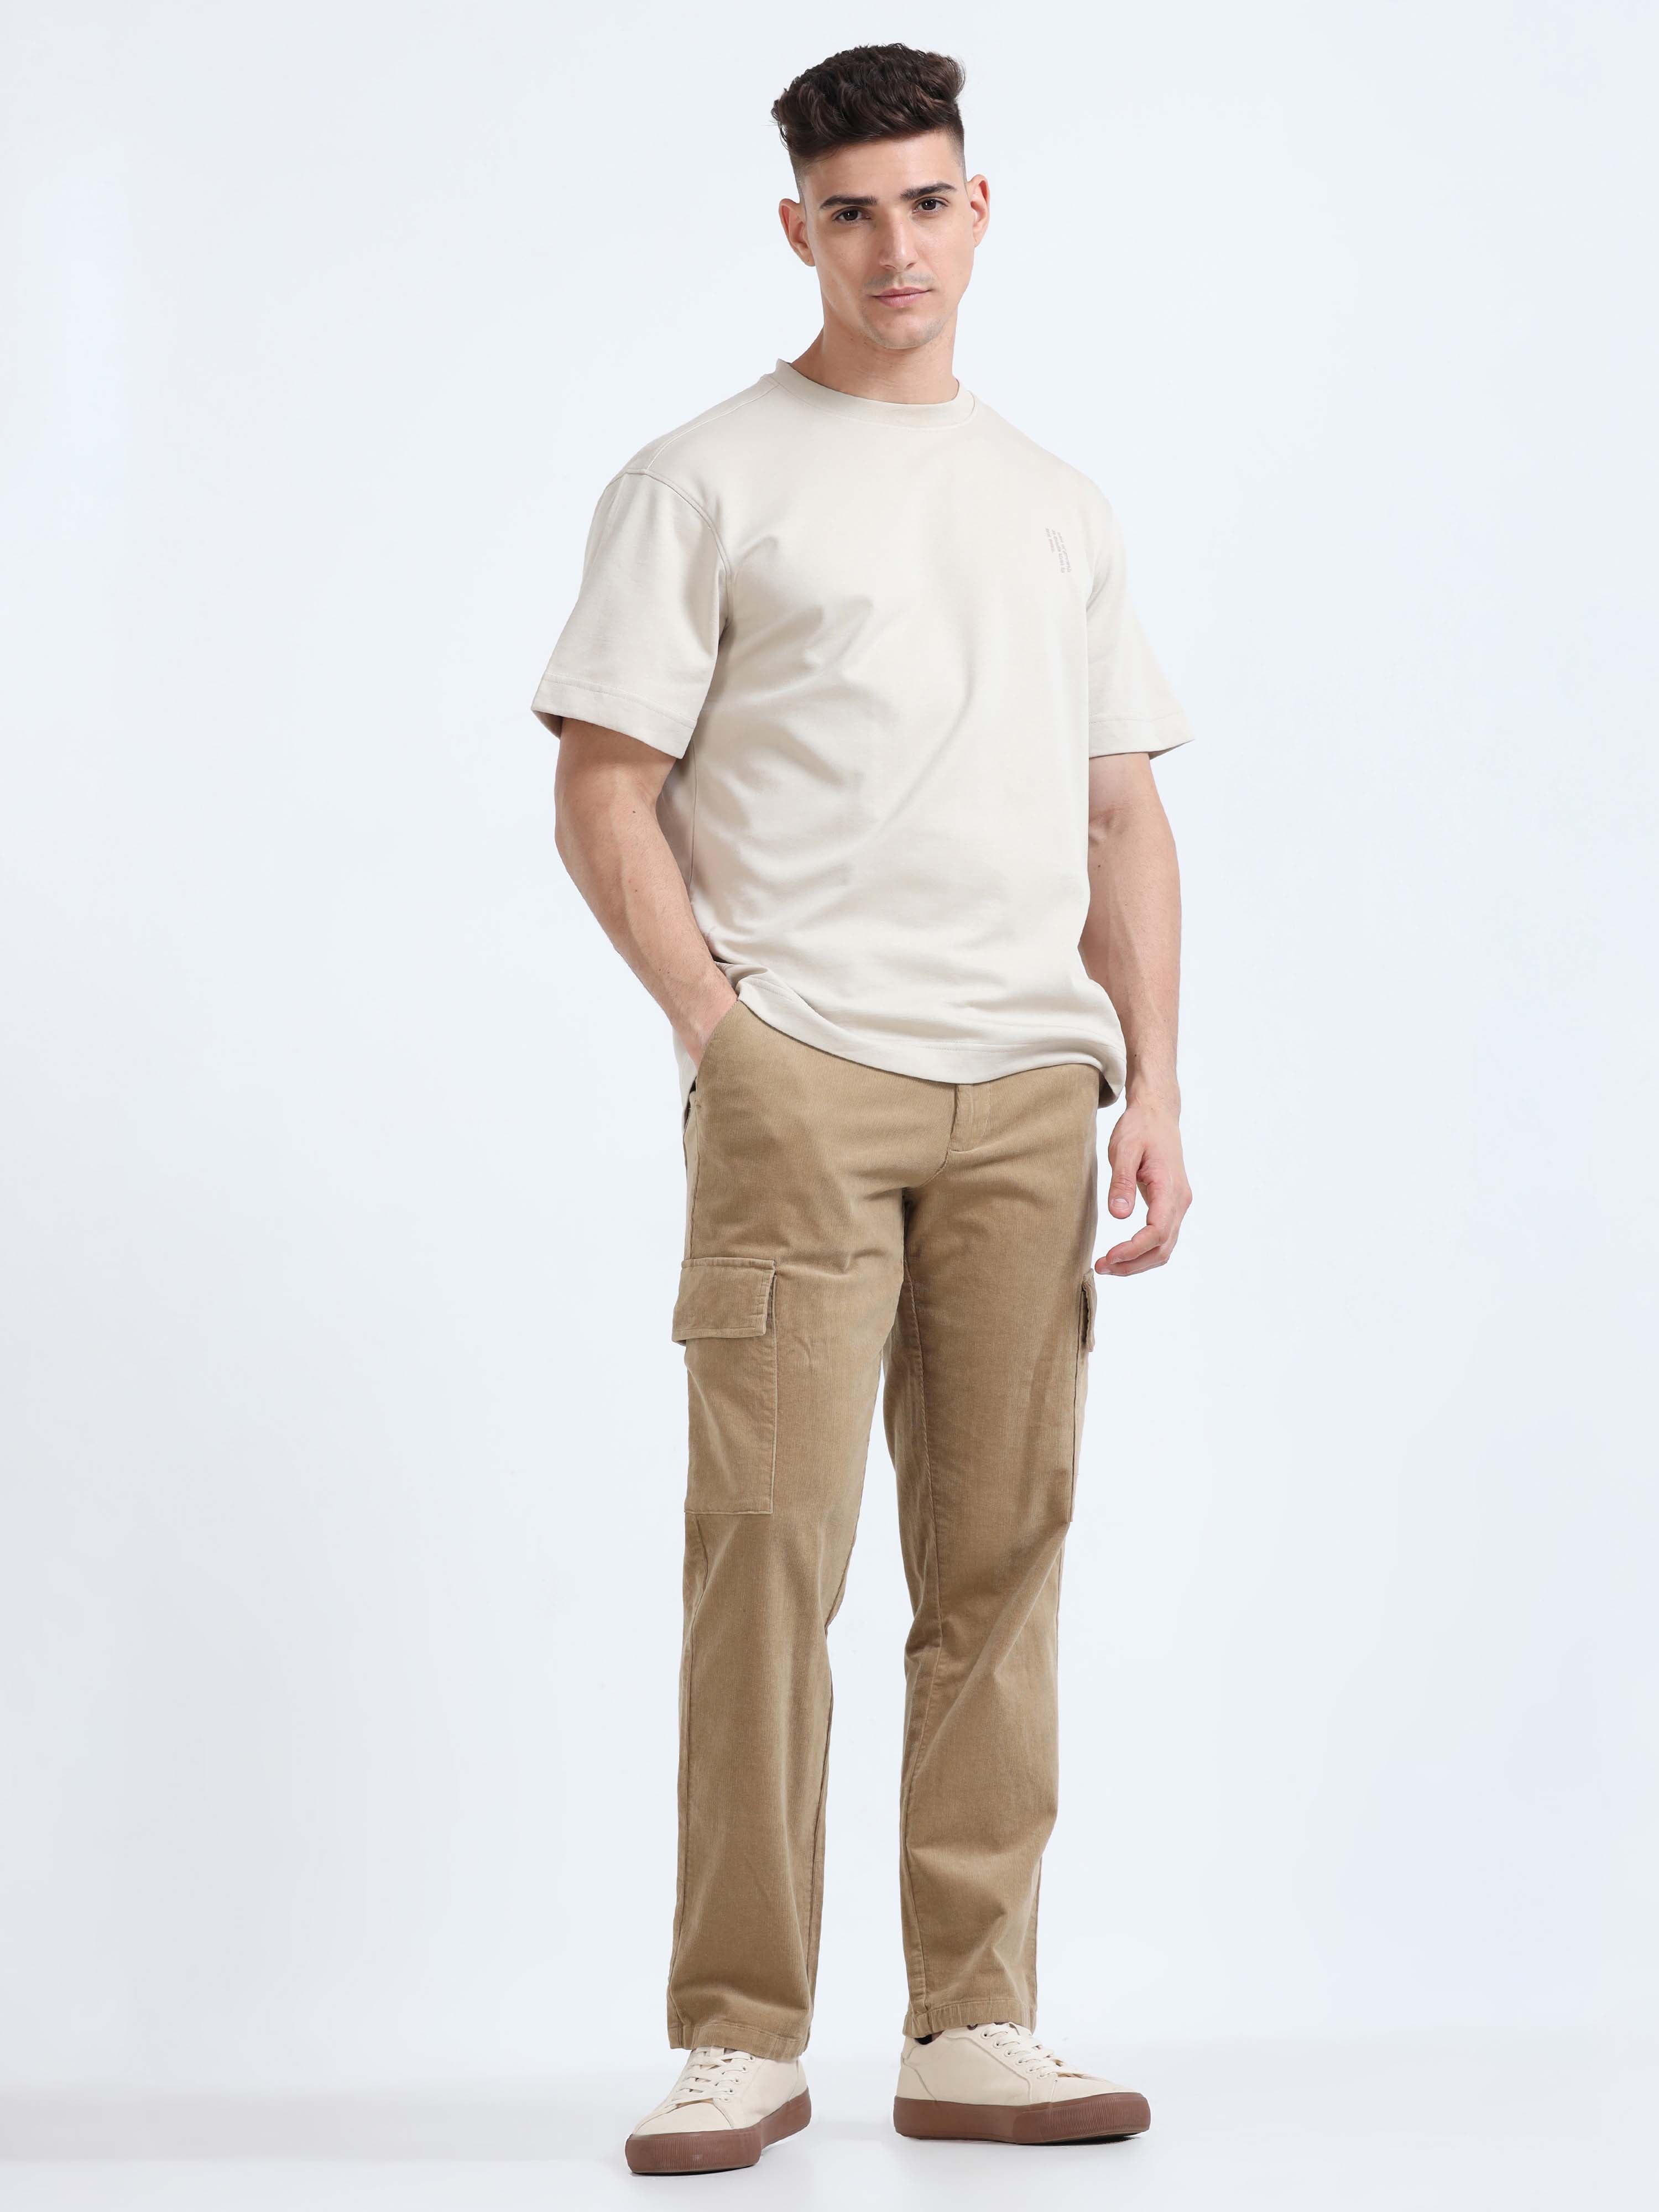 Soft Corduroy Beige Relaxed Cargo Pant